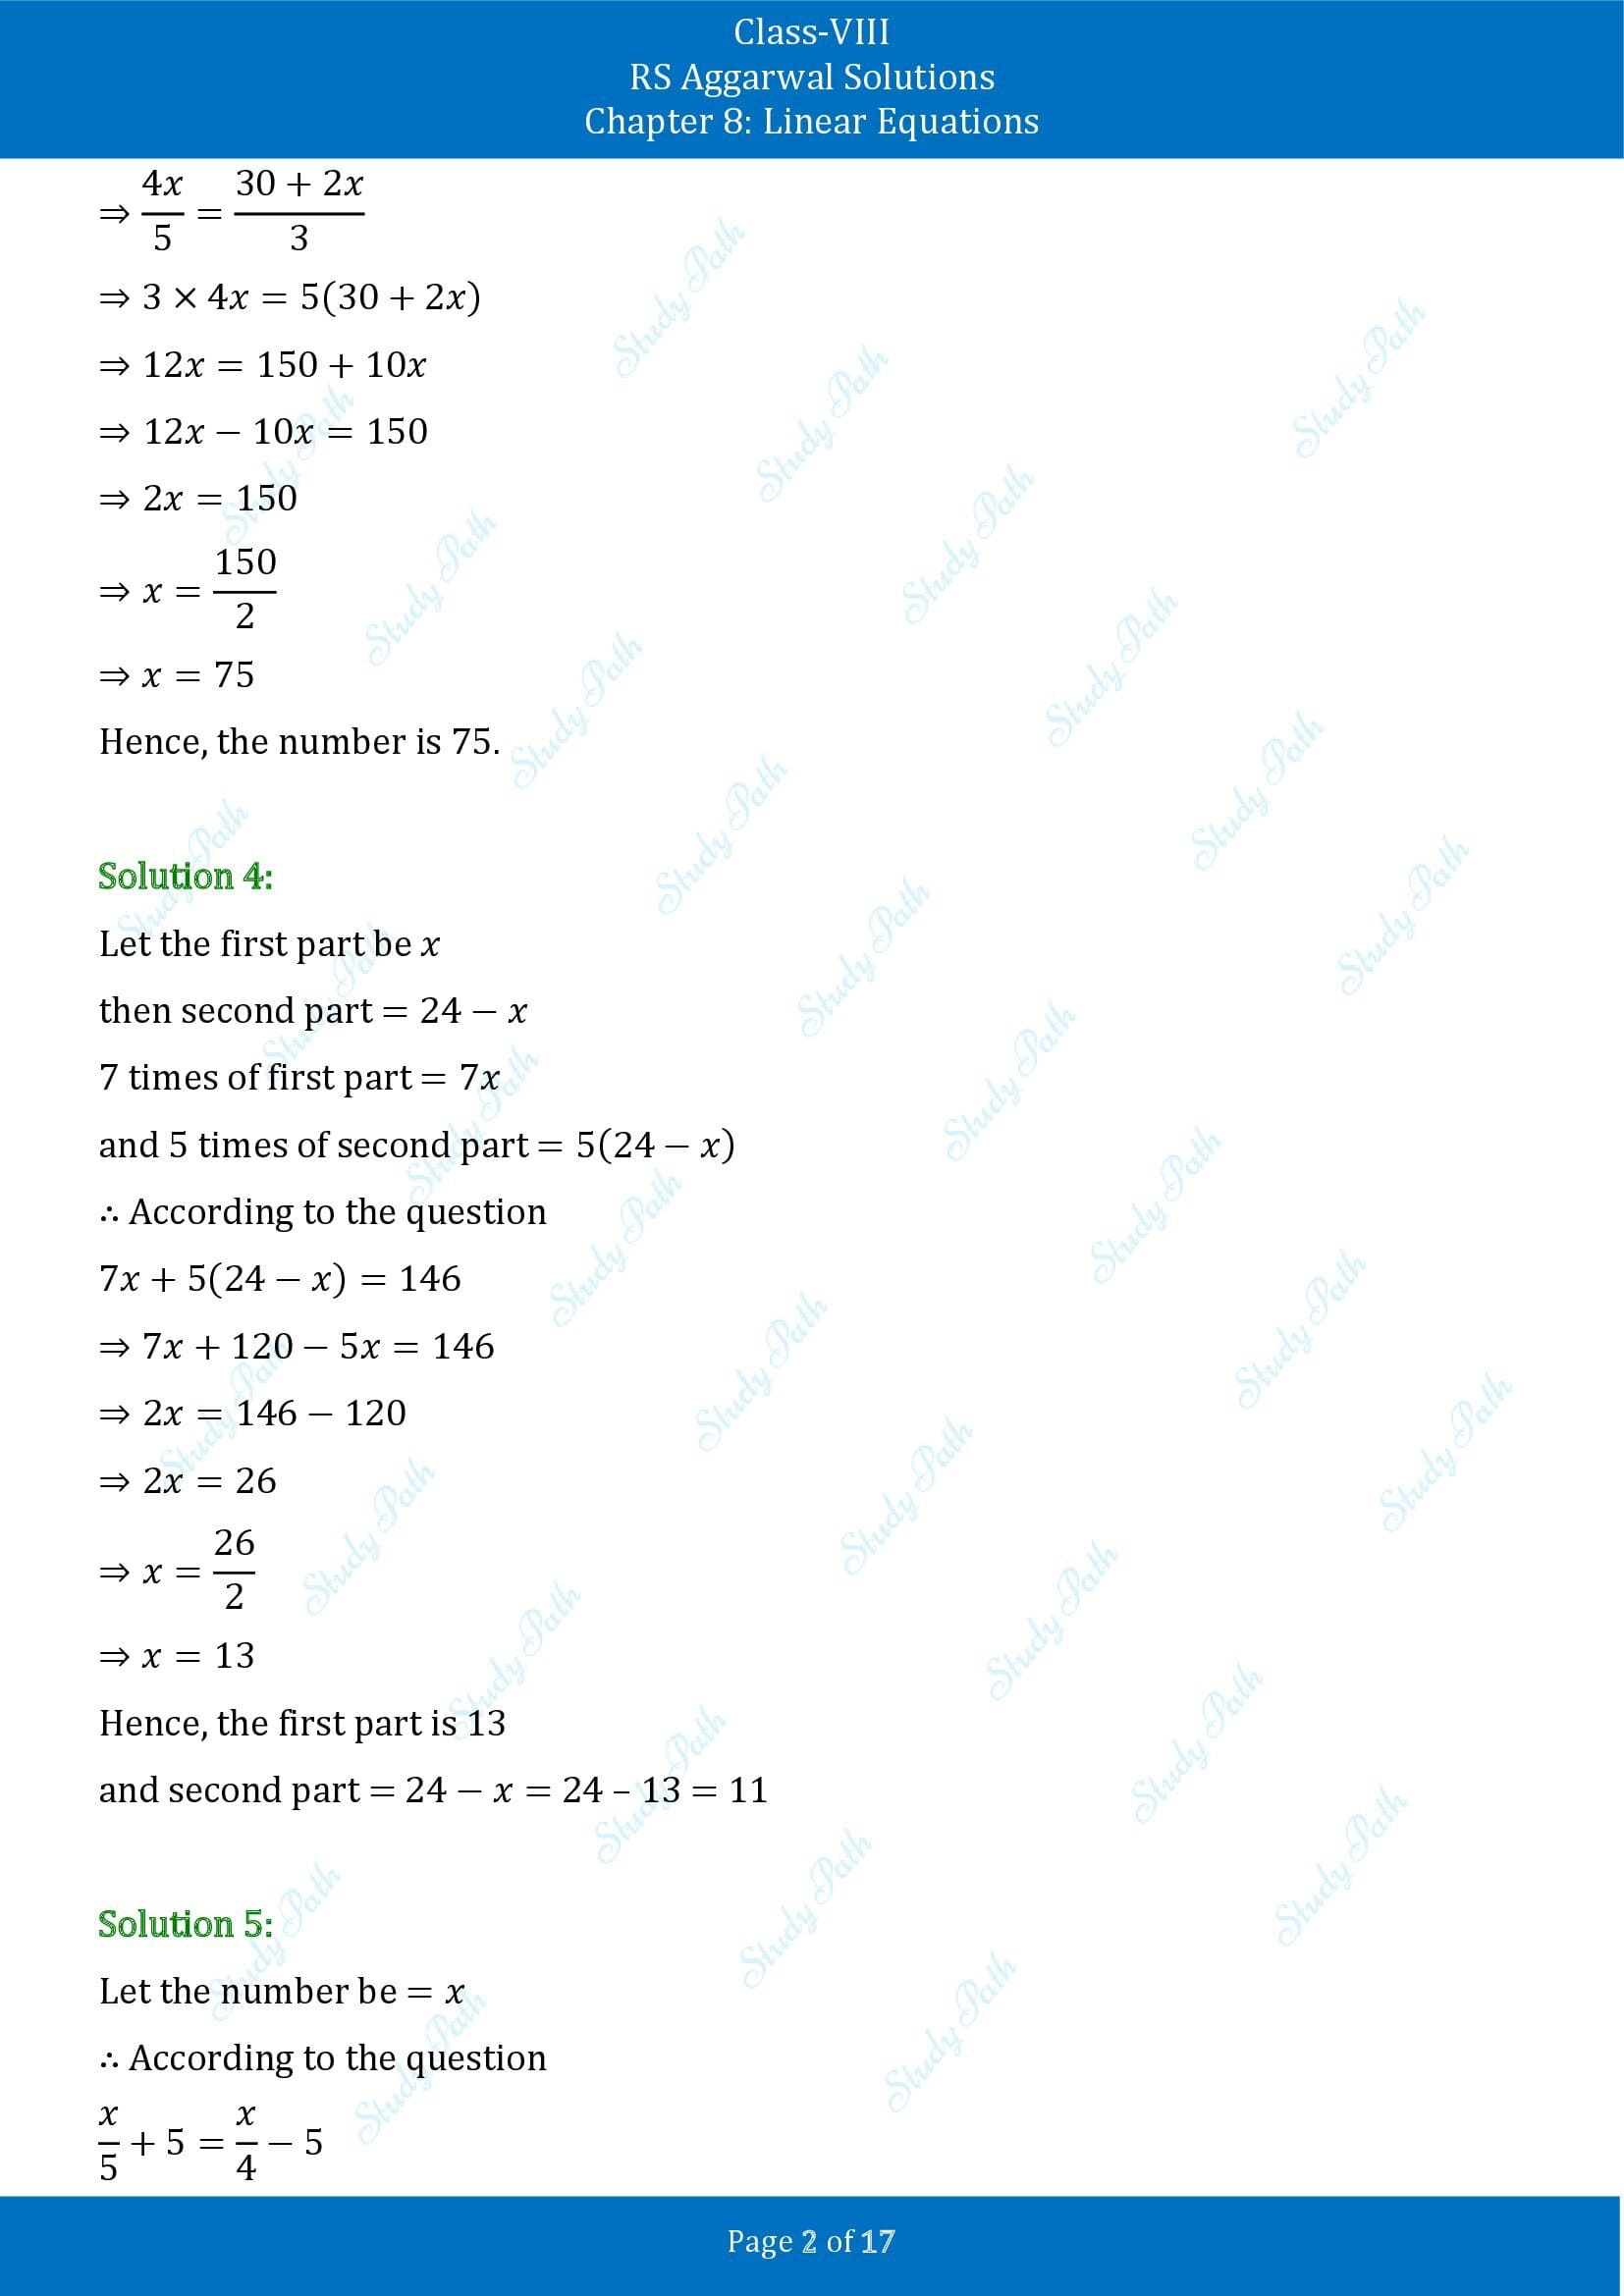 RS Aggarwal Solutions Class 8 Chapter 8 Linear Equations Exercise 8B 00002